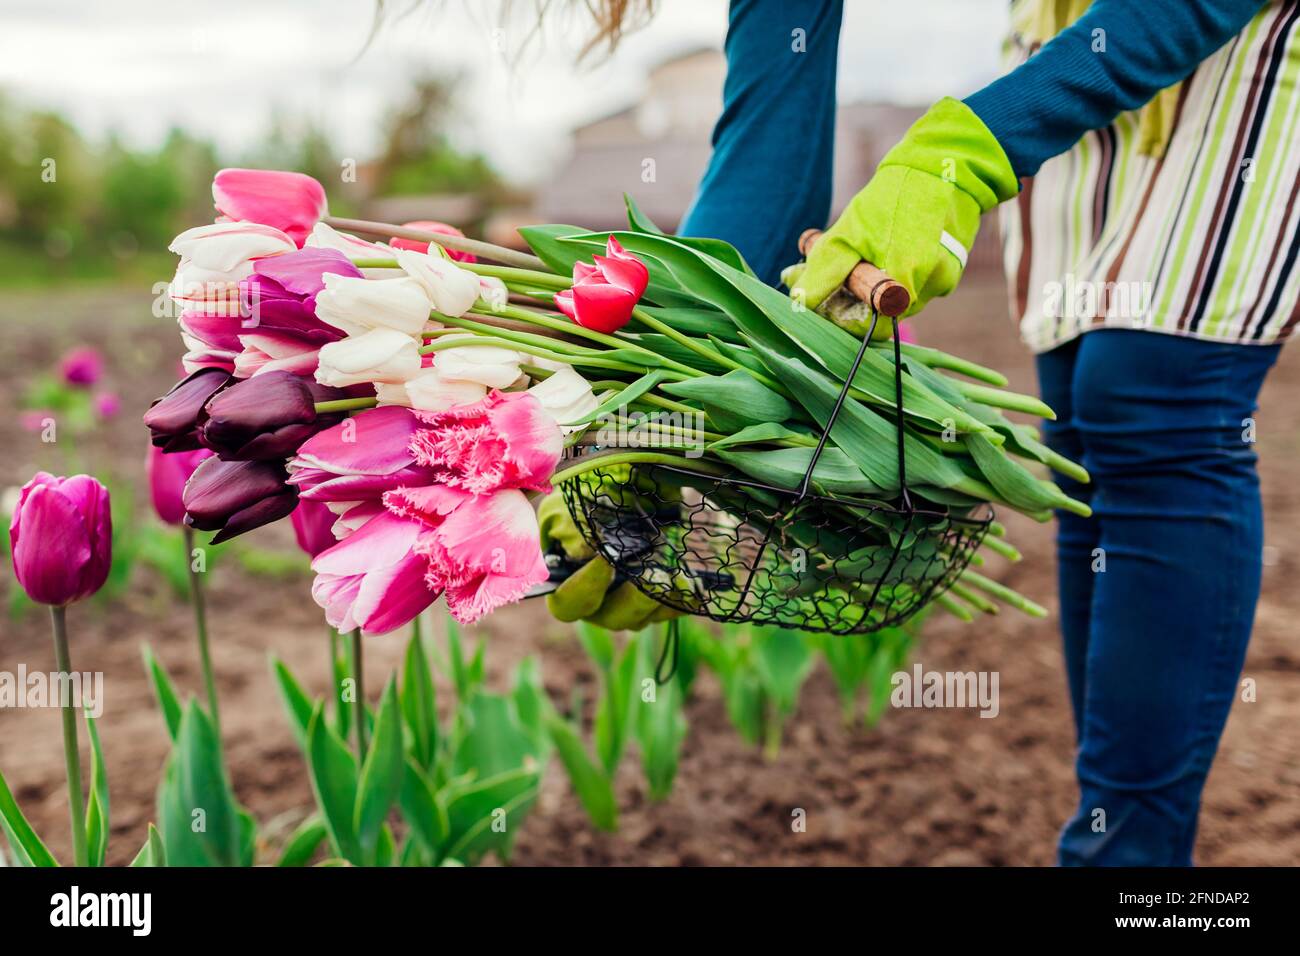 Fresh tulips gathered in metal basket in spring garden. Gardener woman holds purple, white, pink flowers and pruner wearing gloves and apron. Close up Stock Photo